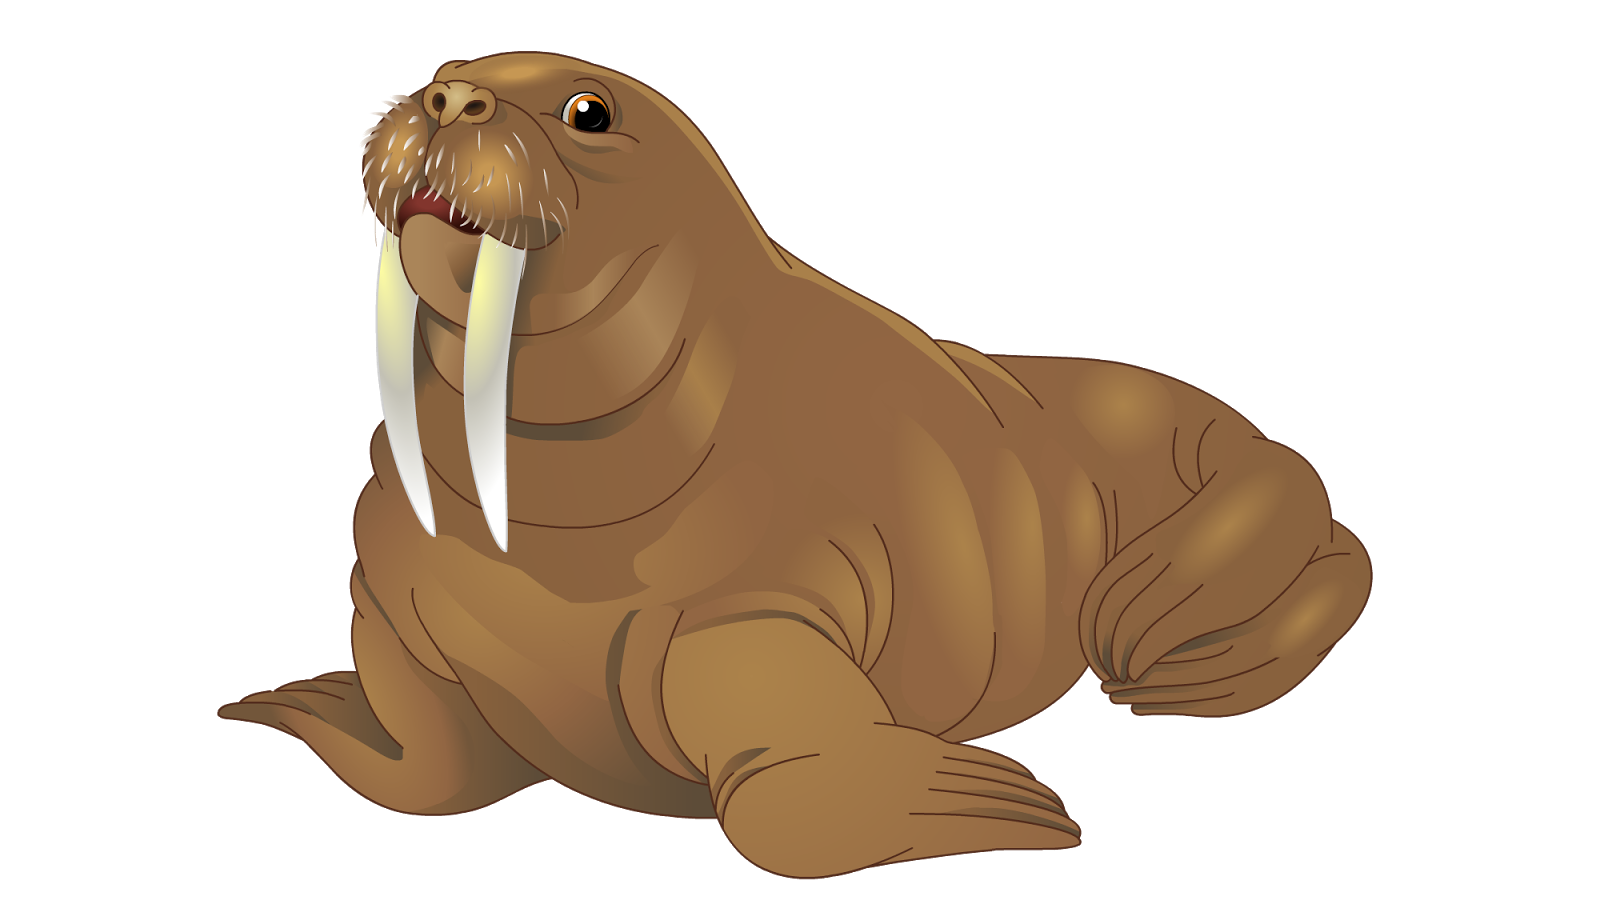 Png images free download. Walrus clipart transparent background sea creature